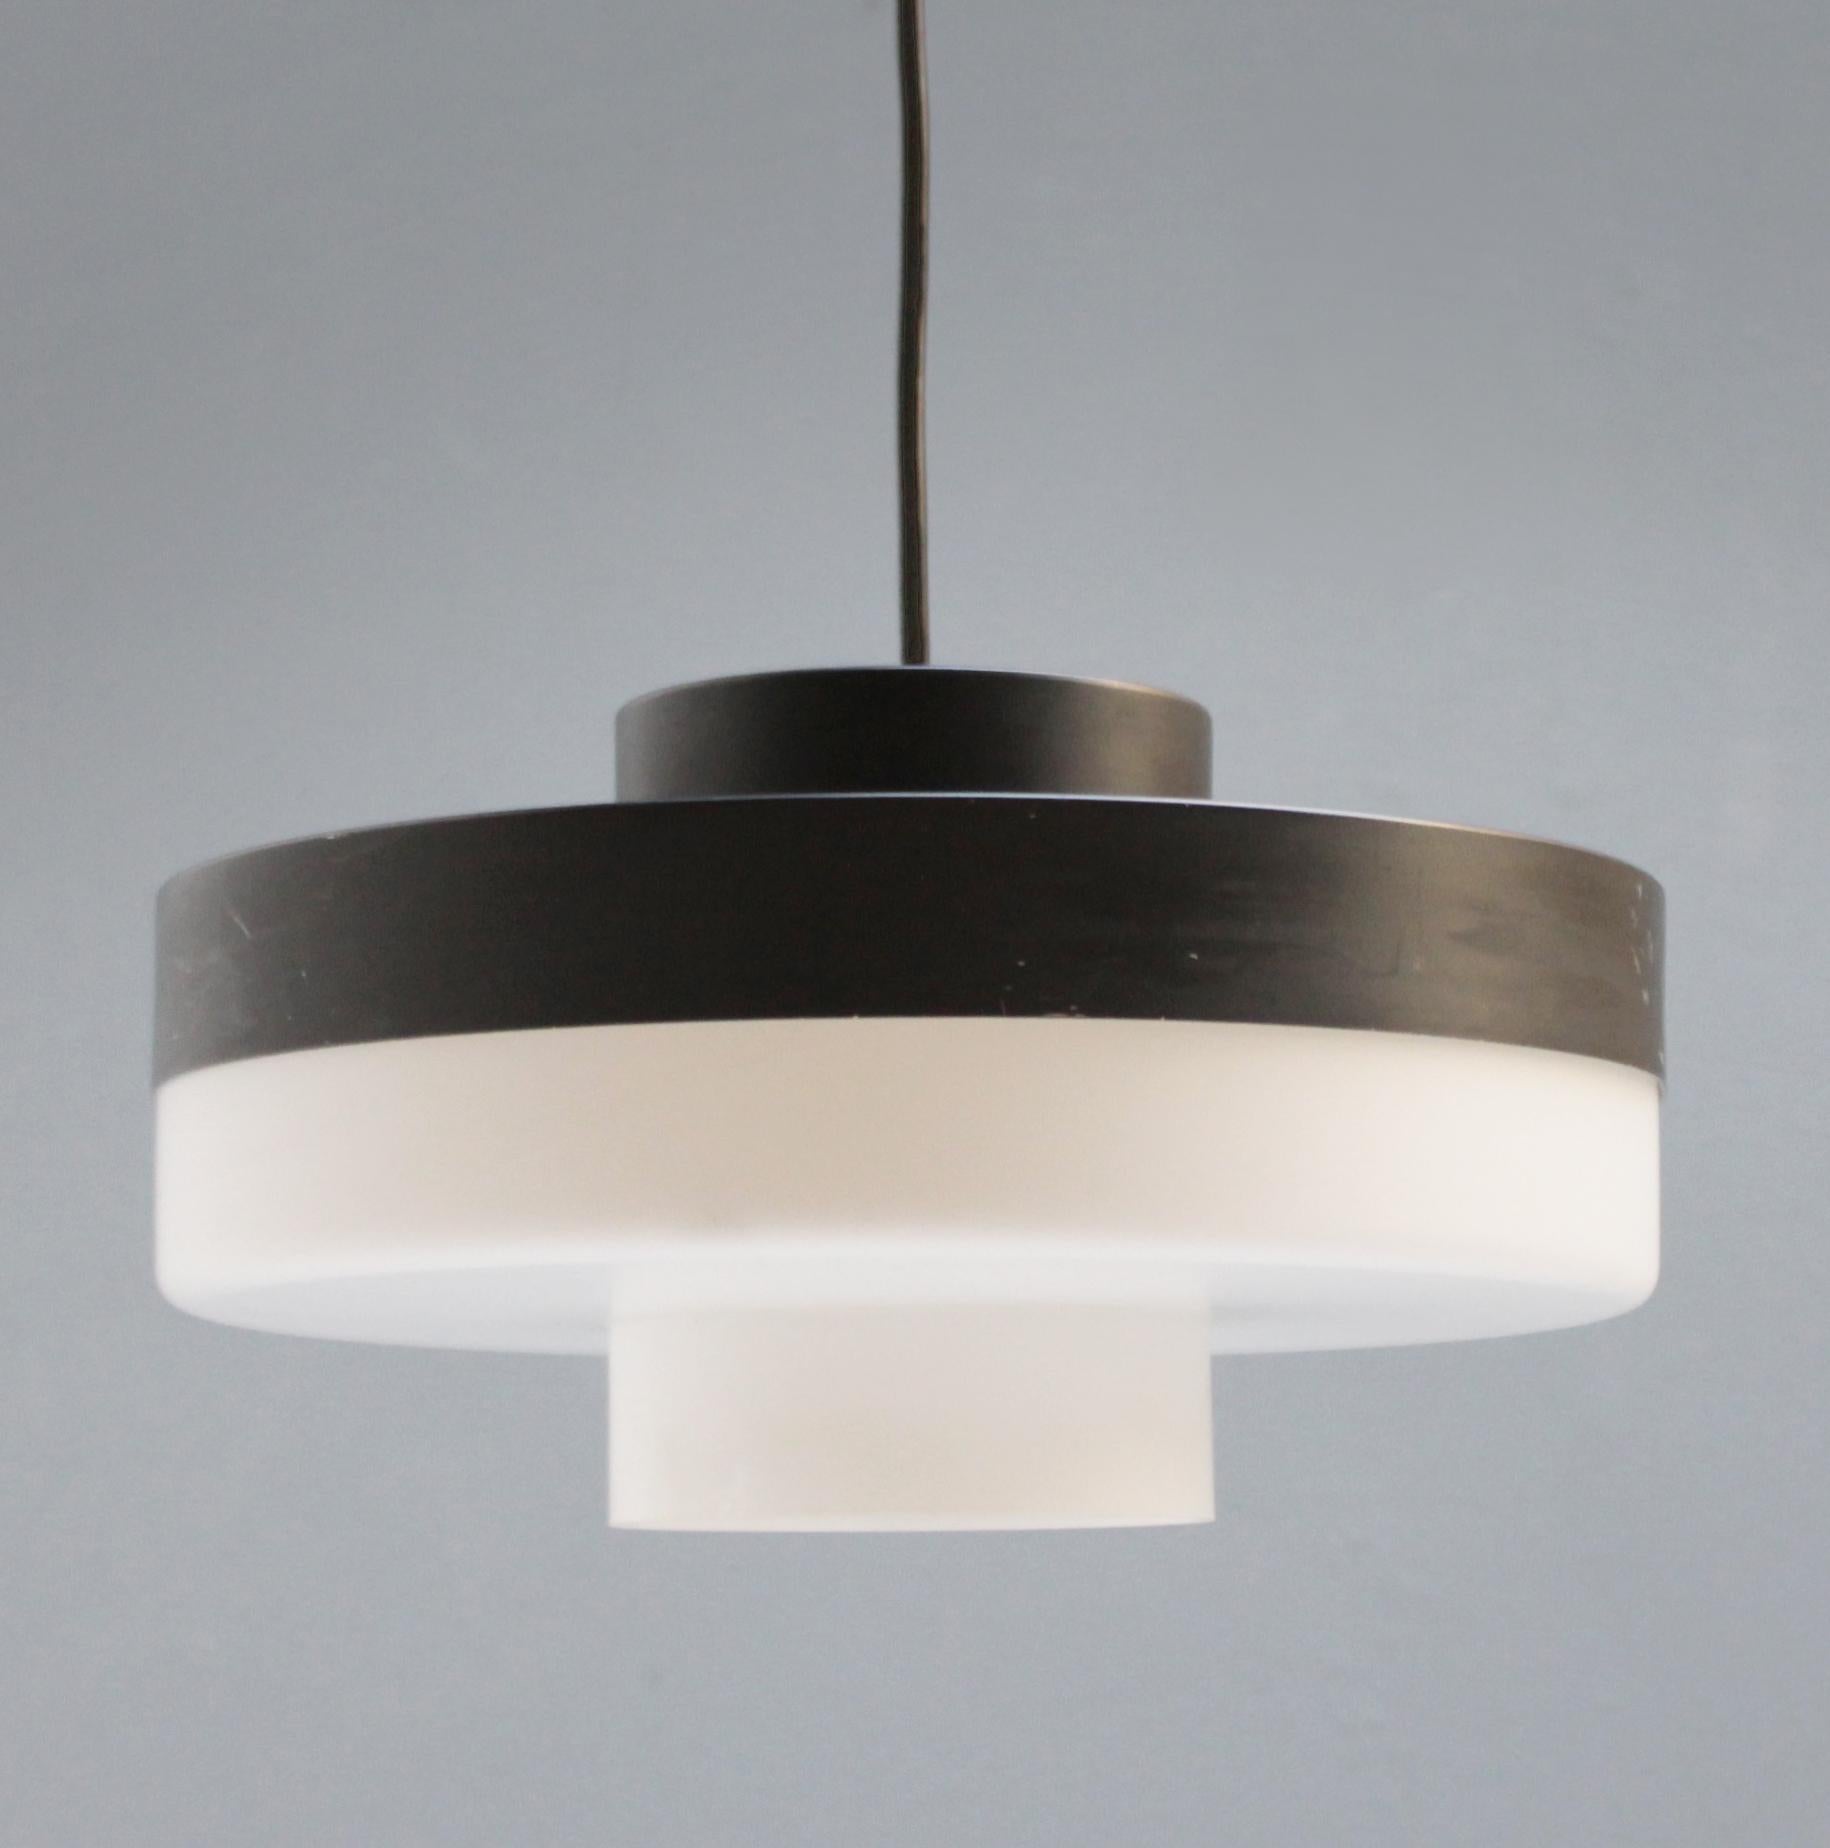 Rare stylish pendant light, model B-1045 by the French/Finnish designer Li Helo for Raak Amsterdam, 1968. Opaline glass with anthracite lacquered metal.
Dimension: height (16 cm), diameter (30 cm). One bulb E27/E26 of max 100 watt, the wire is used